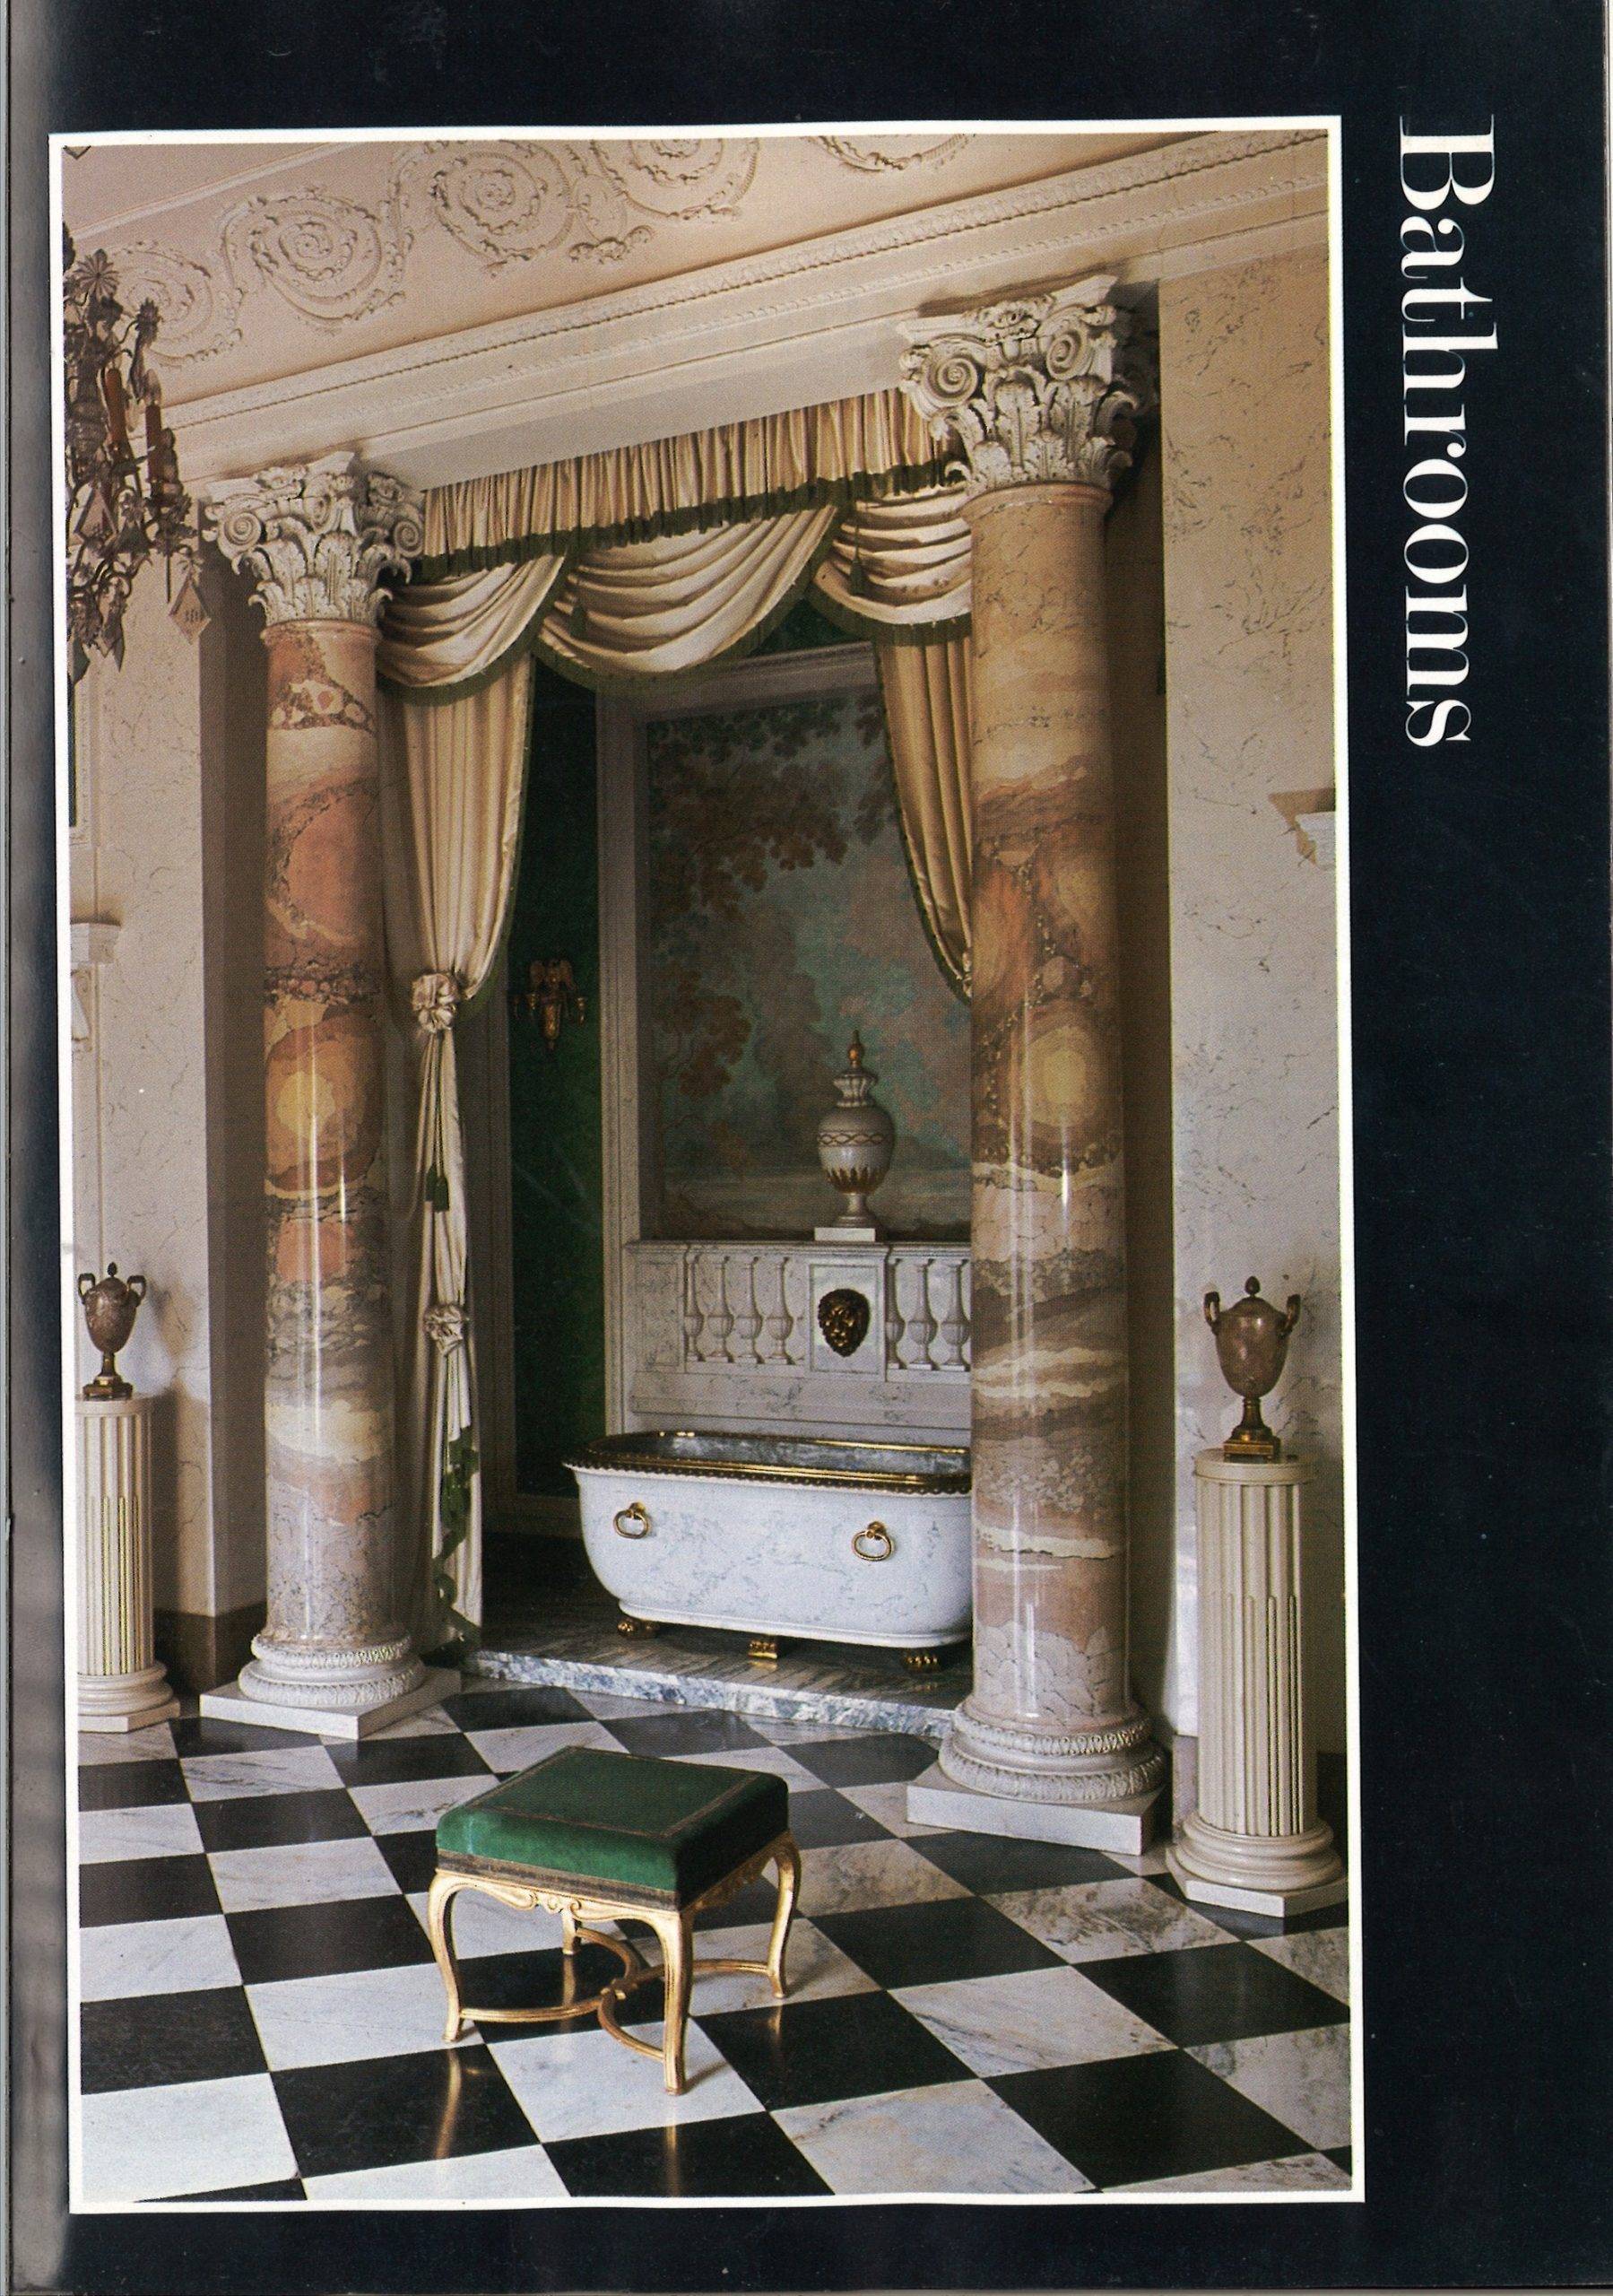 A checkered floor, a set back bath between two marble collumns.